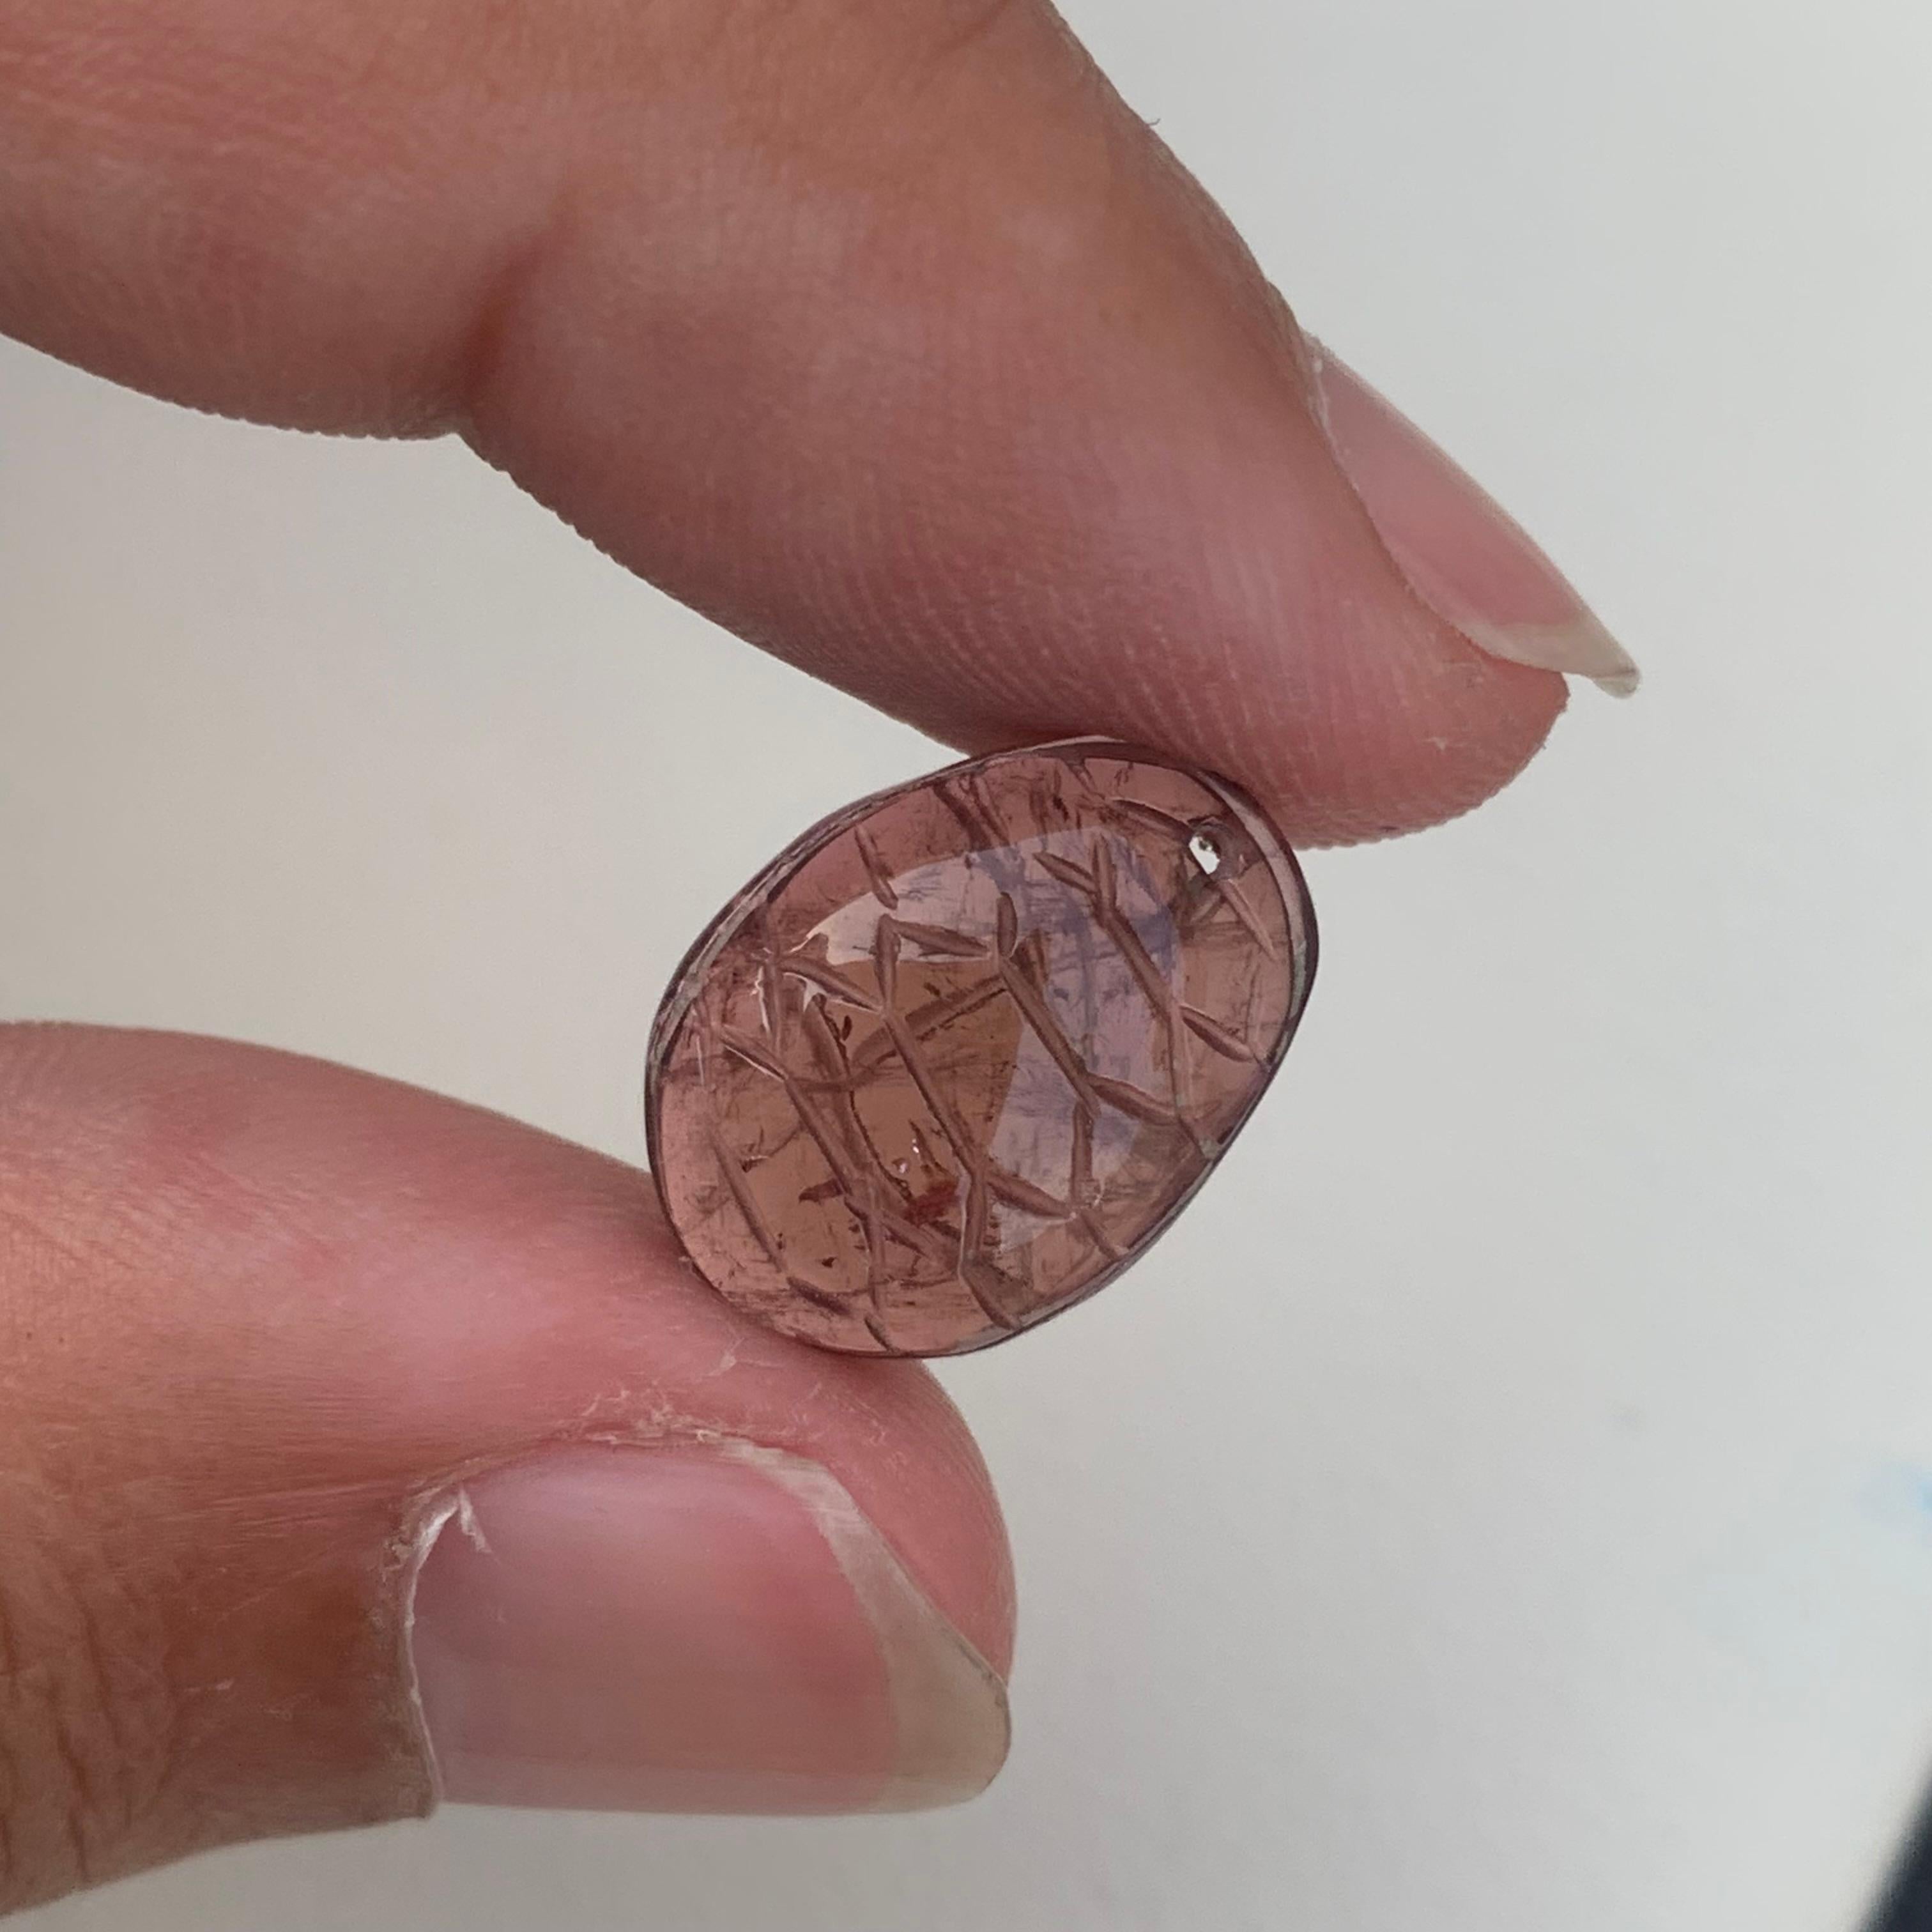 18th Century and Earlier 7.90 Carat Lovely Loose Peach Color Tourmaline Carving From Madagascar Africa For Sale